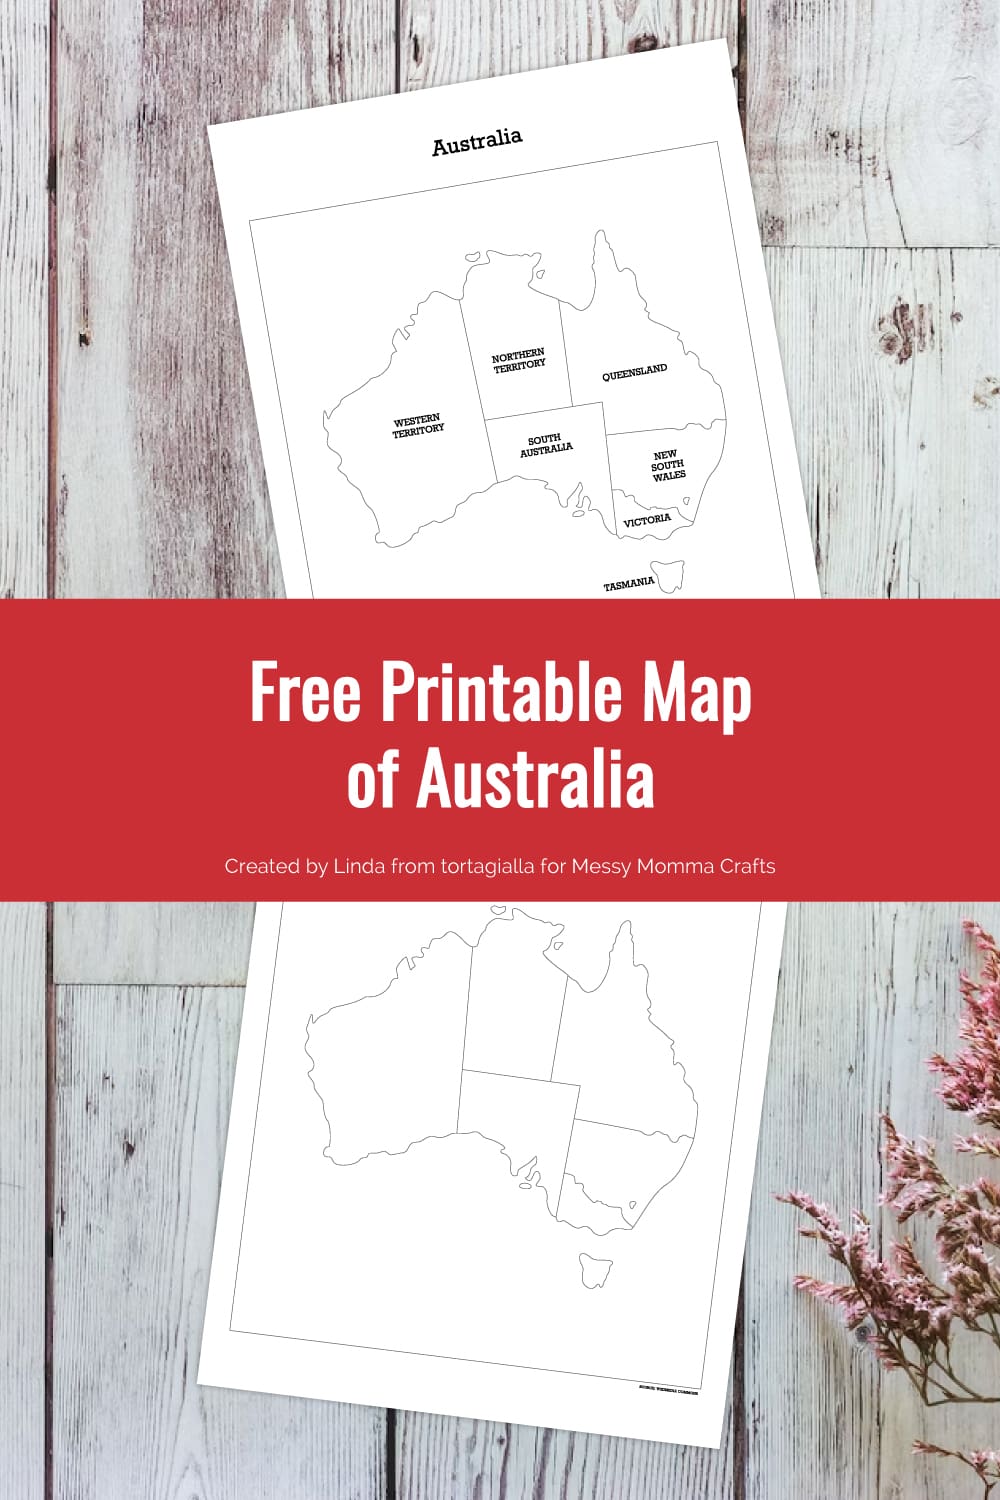 Preview of map of Australia printable pages on top of wooden plank background with some pink foliage in bottom right corner.